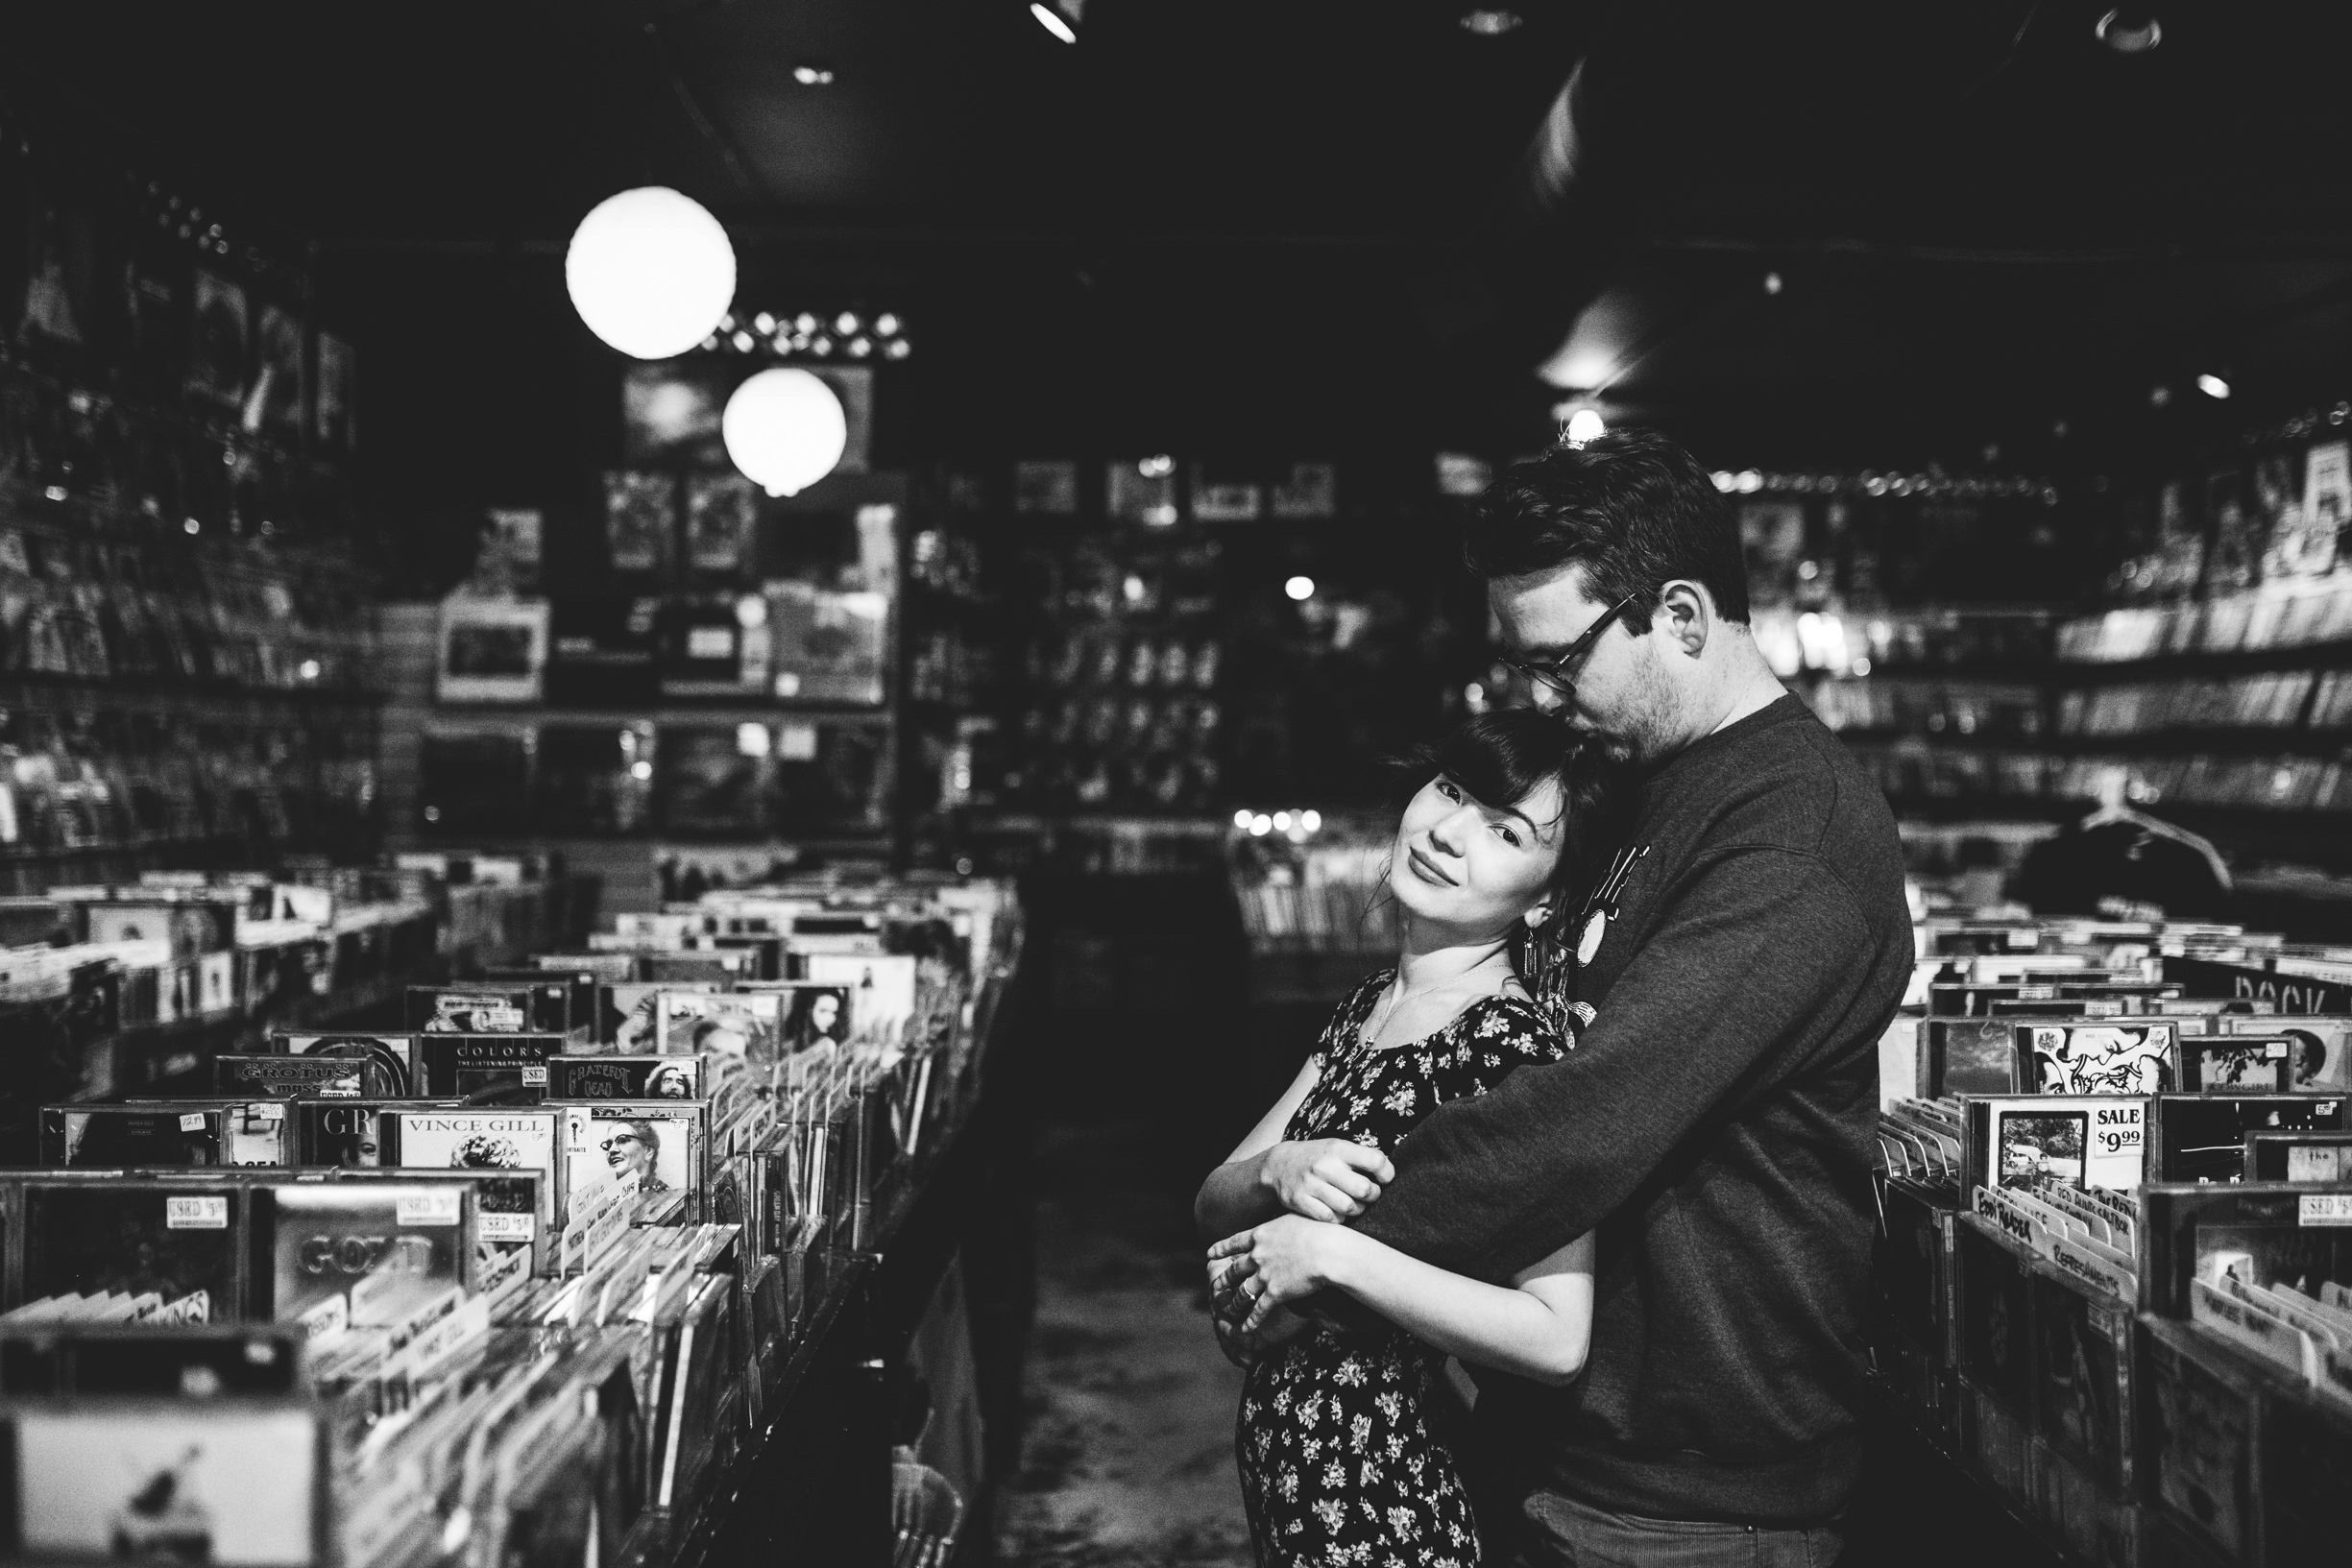 louisville-engagement-photographer-record-store-in-home-session-crystal-ludwick-photo (44 of 53).jpg